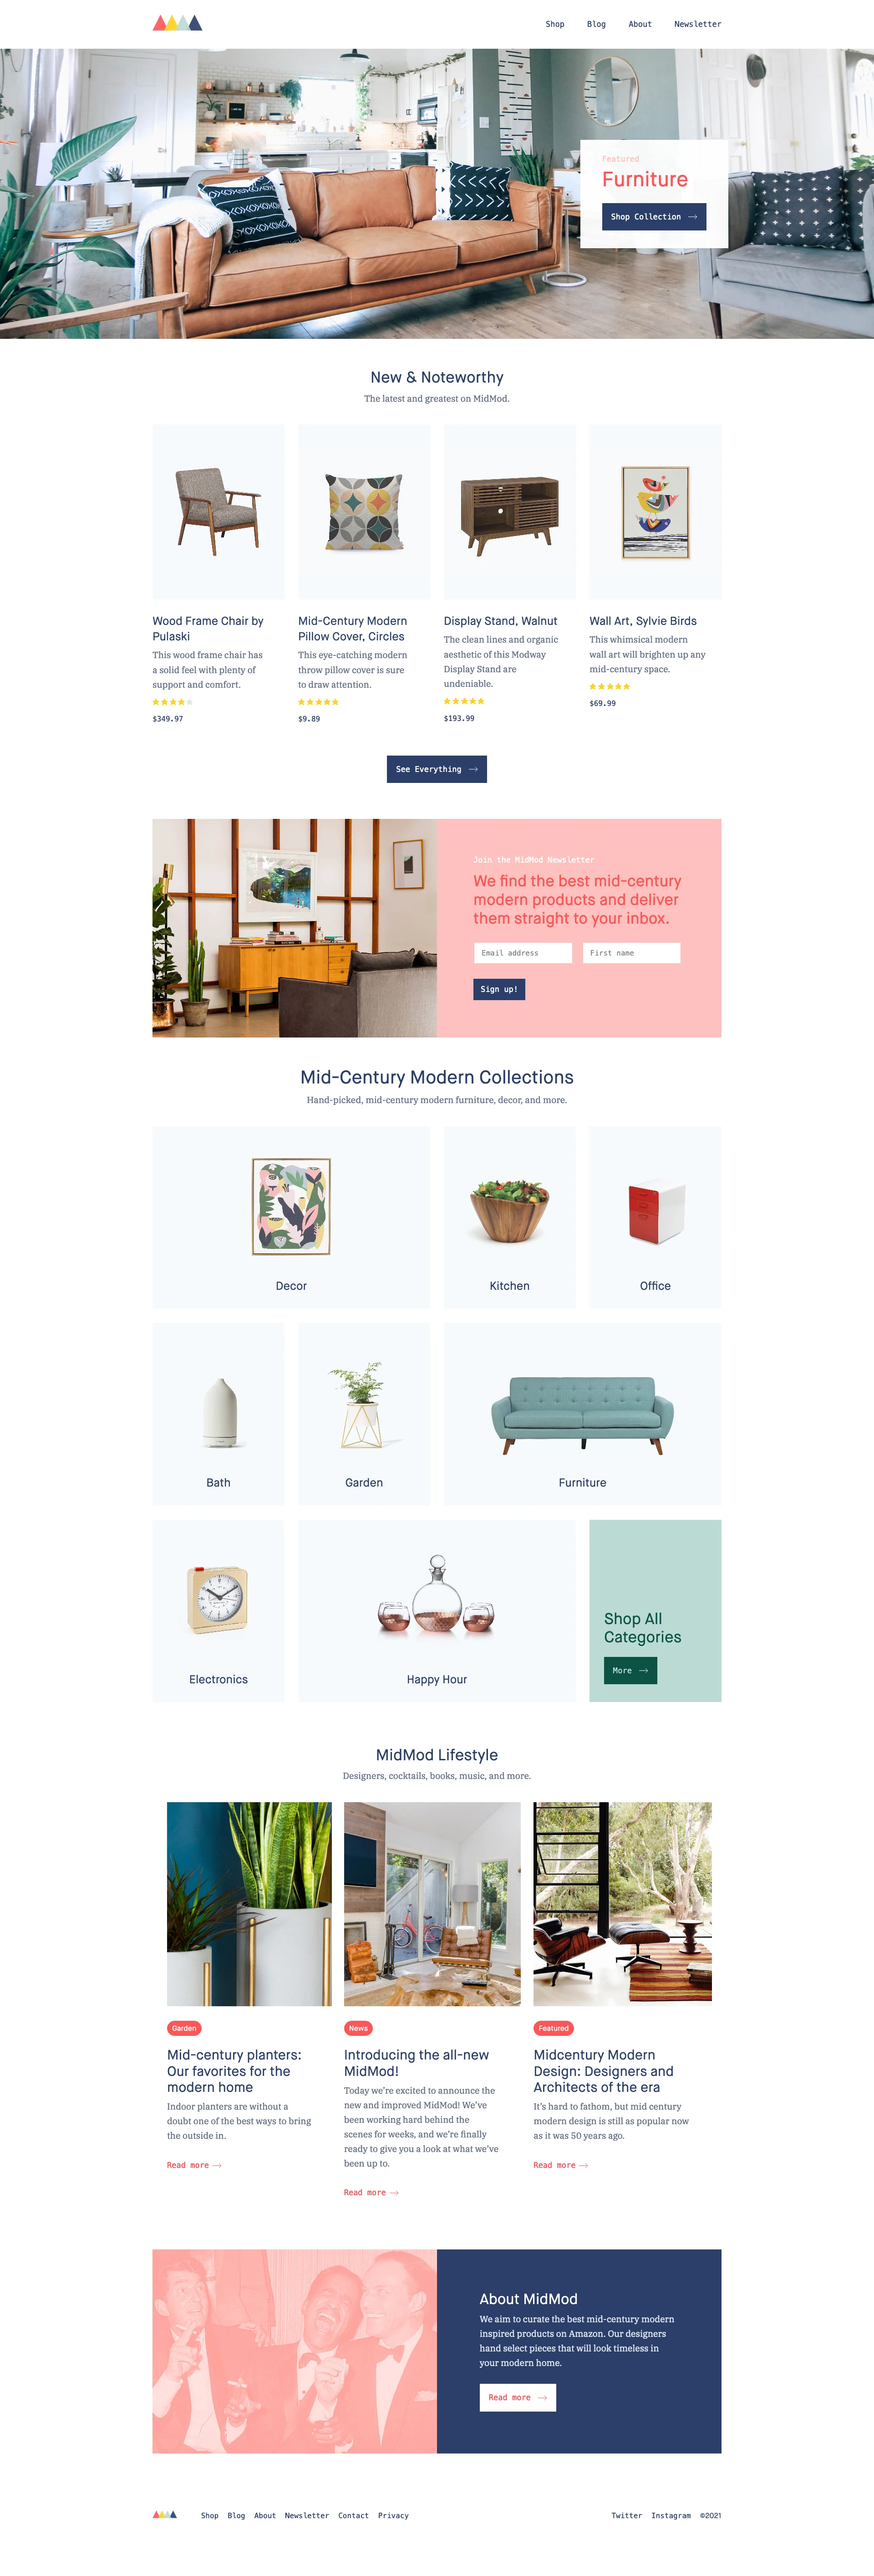 MidMod Landing Page Example: We scour Amazon for the best mid-century modern furniture, decor, and more. We marry form and function while staying true to the design of the era.